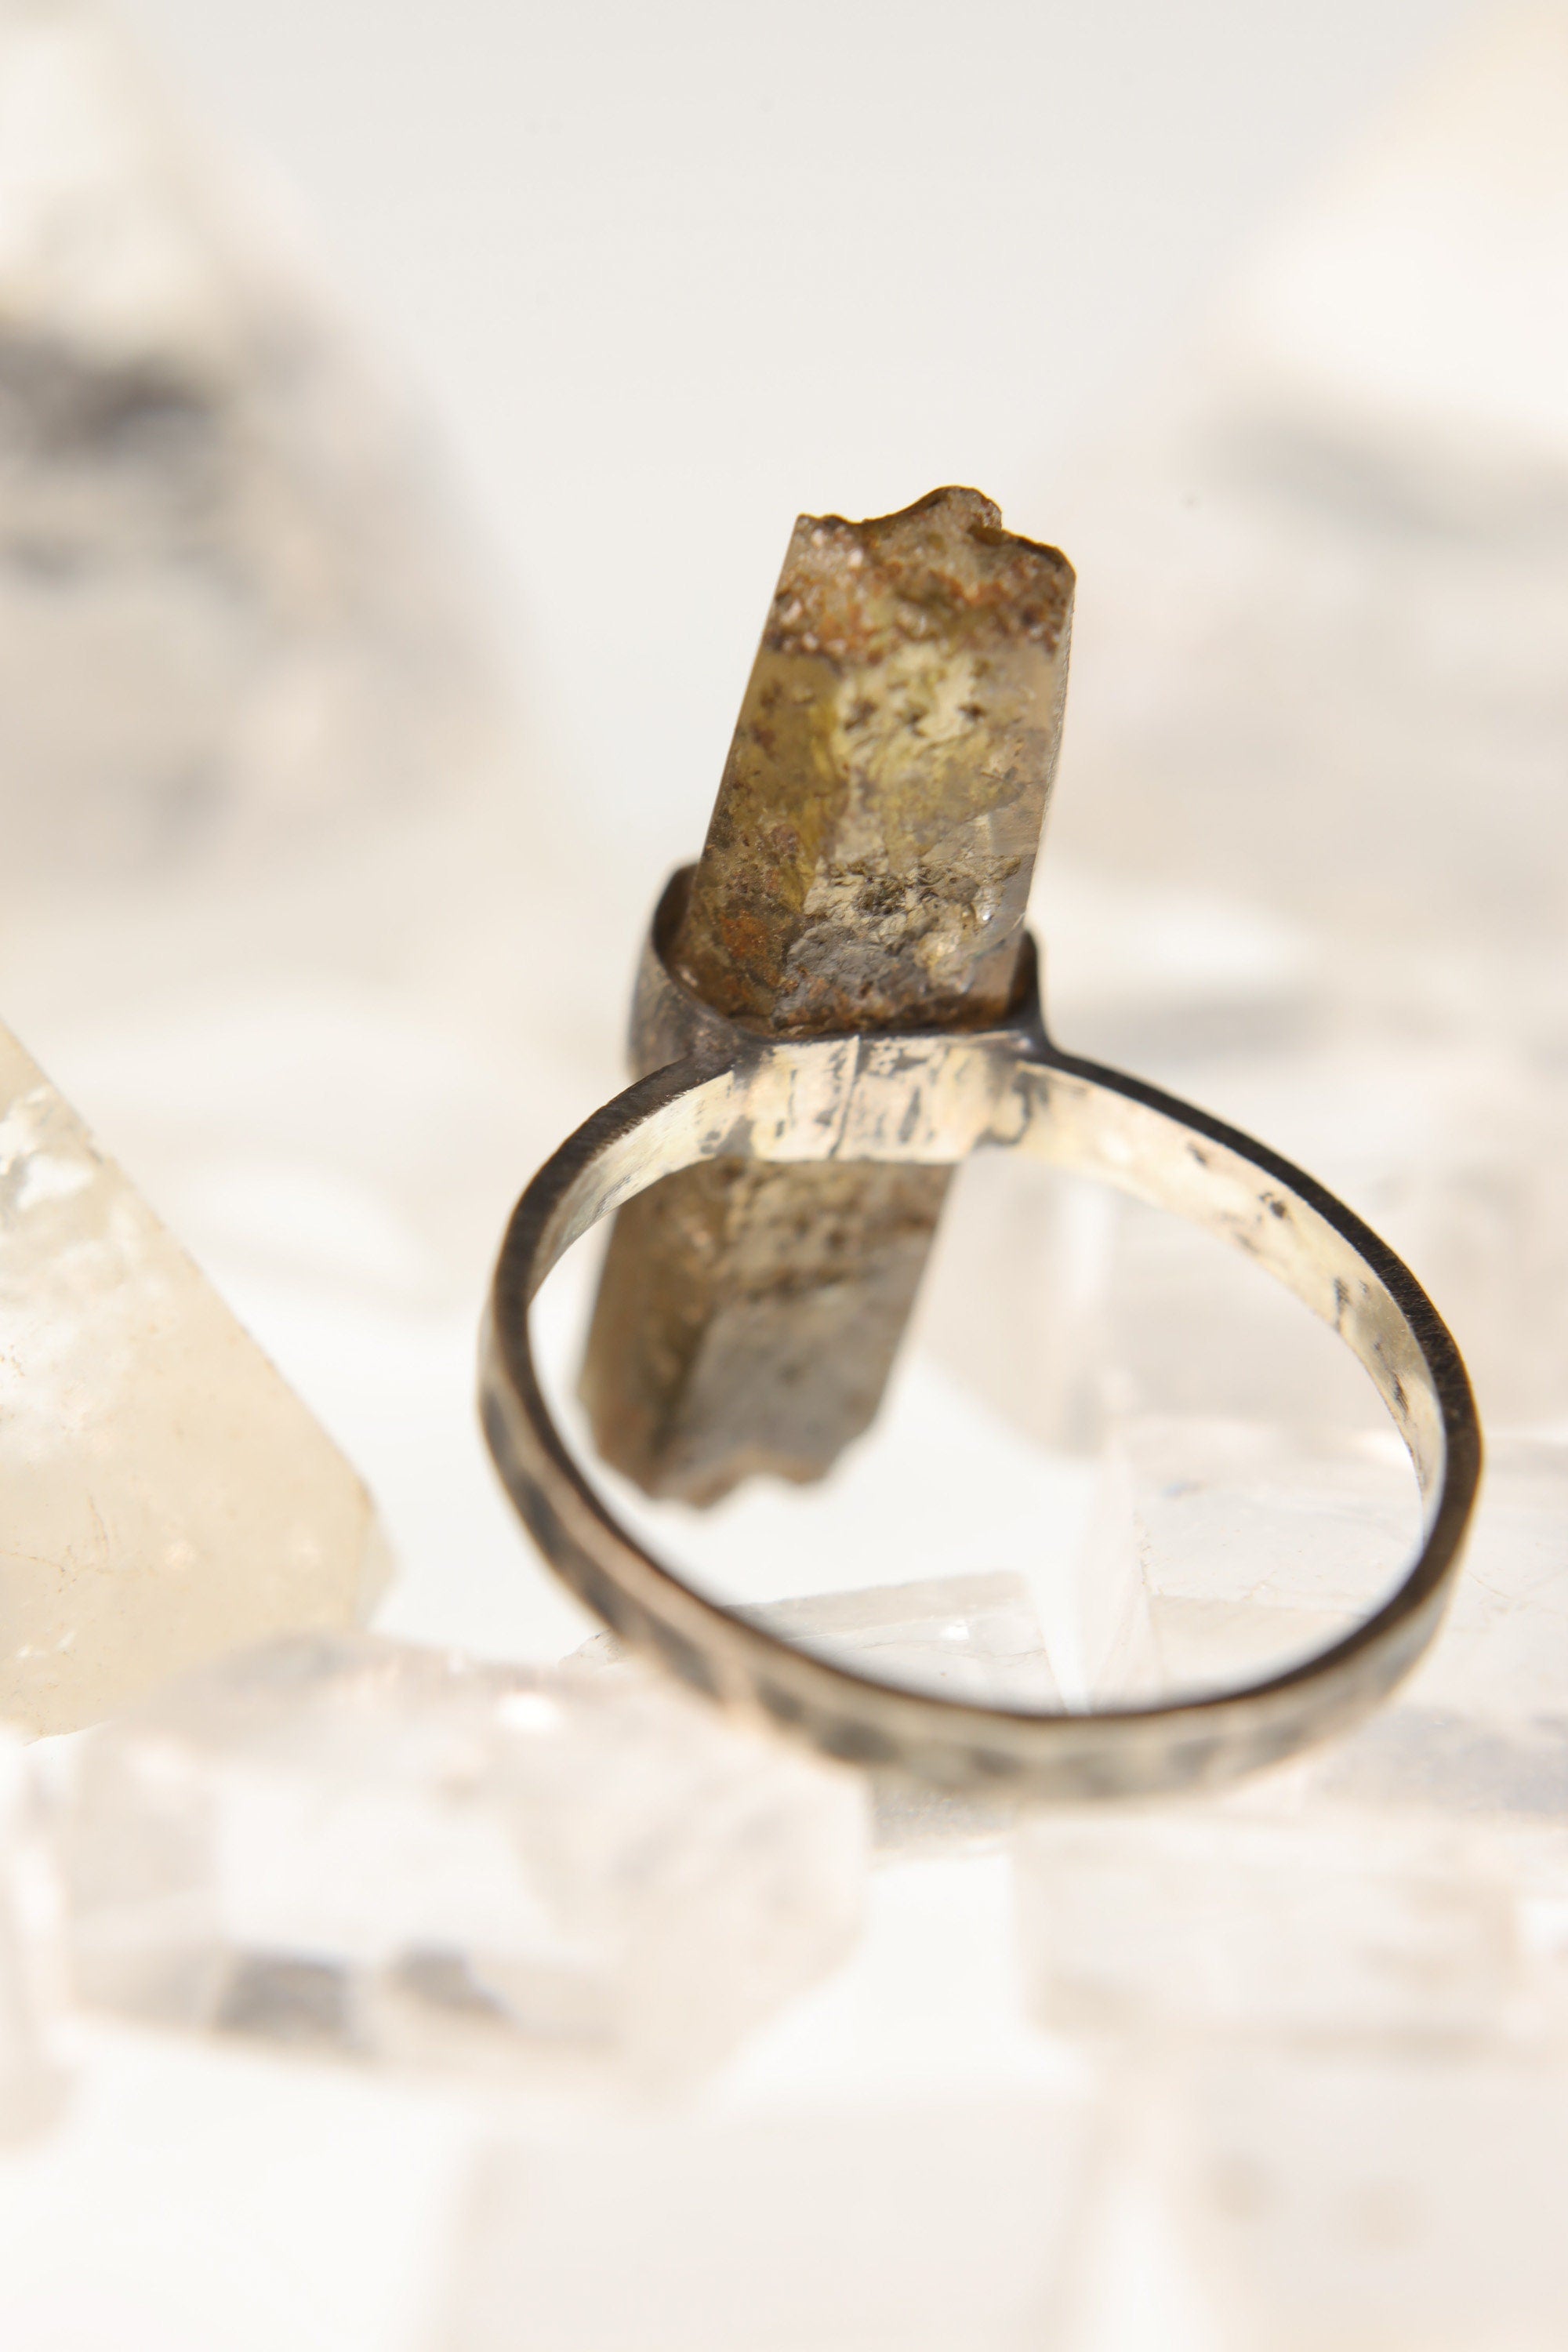 Torrington Whisper: Textured & Oxidised Sterling Silver Ring with Raw Australian Smoky Citrine - Size 7 1/2 - NO/01